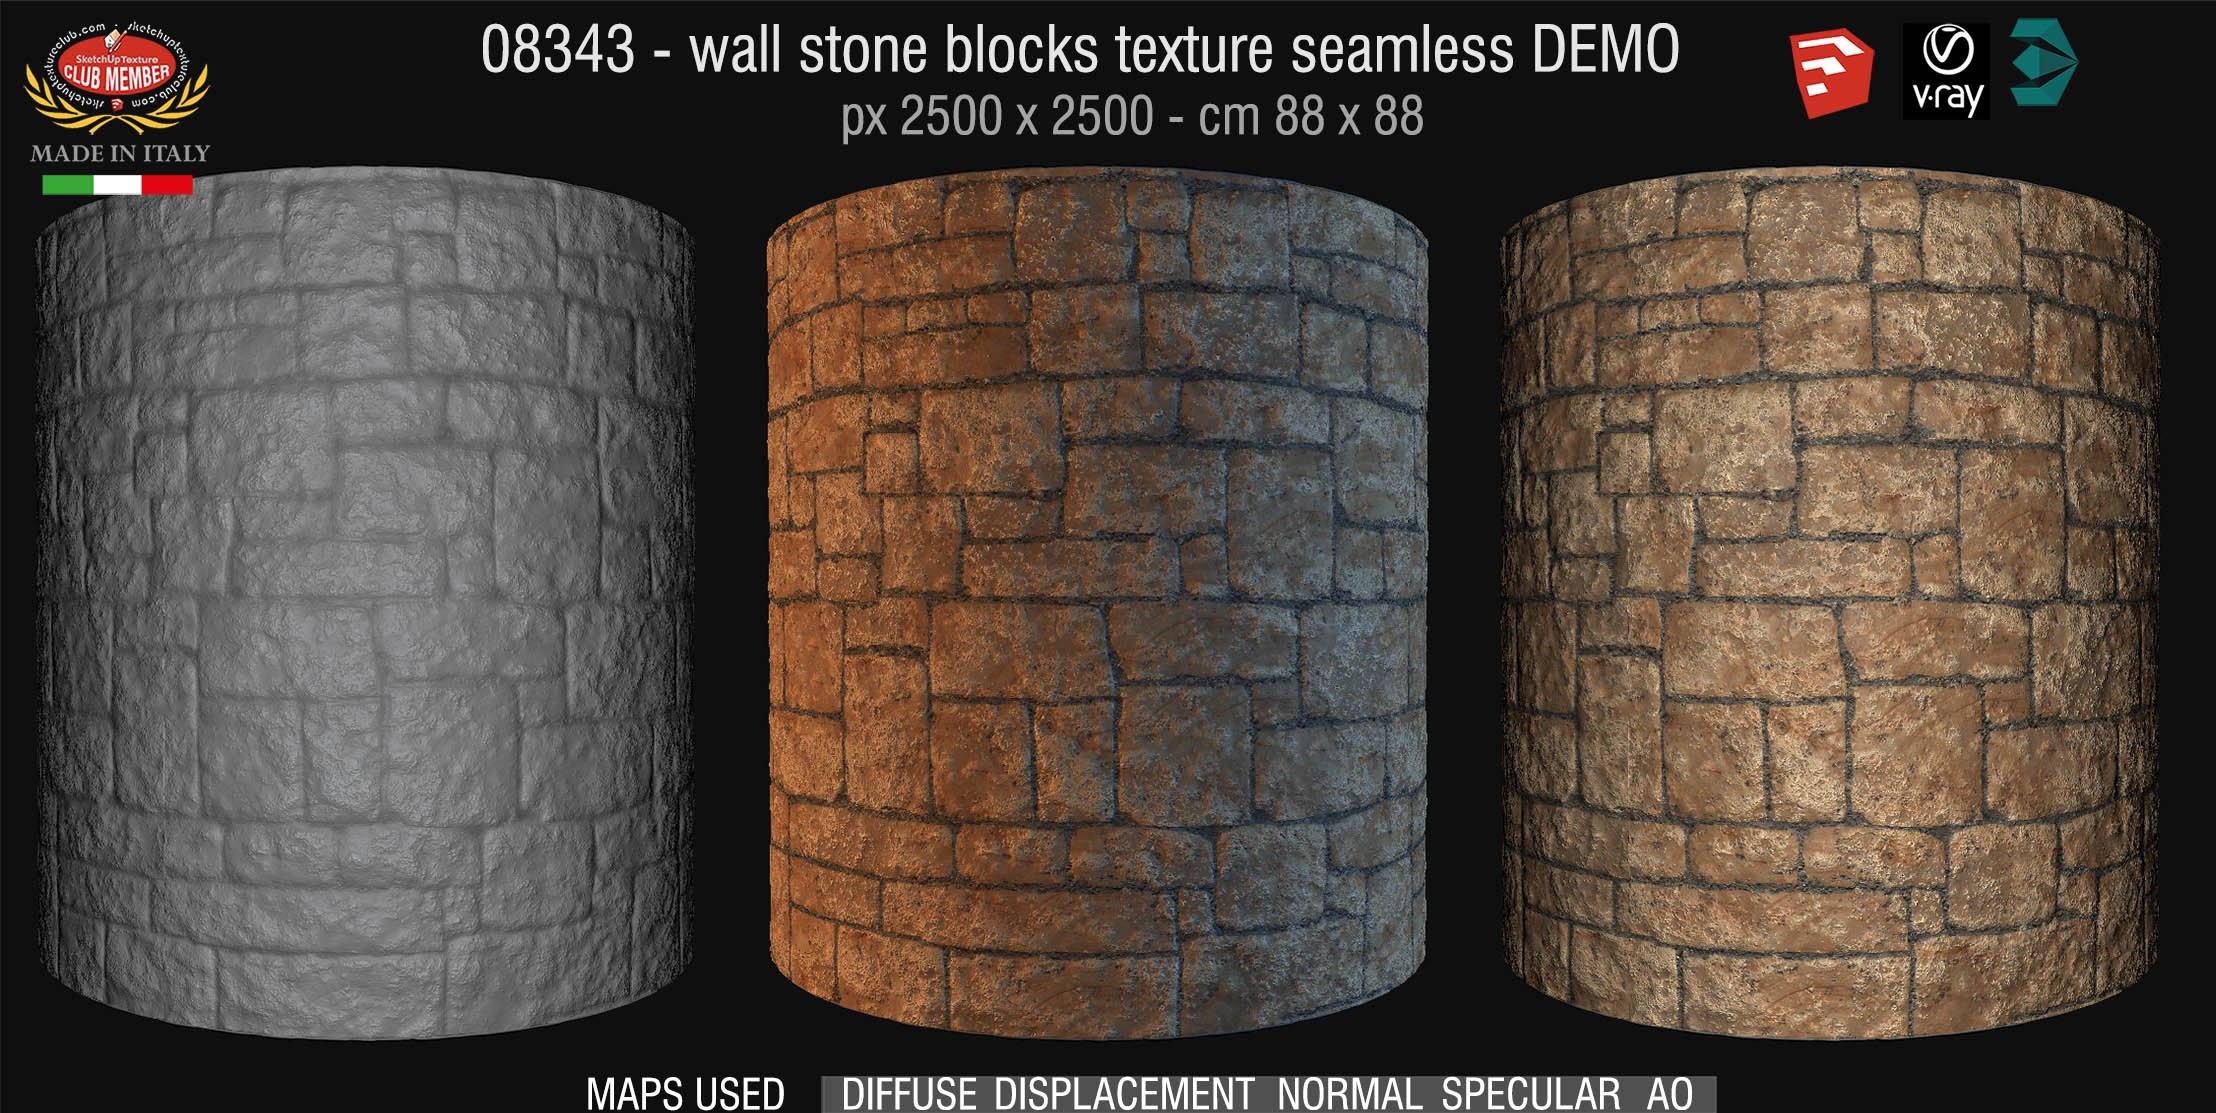 08343 HR Wall stone with regular blocks texture + maps DEMO